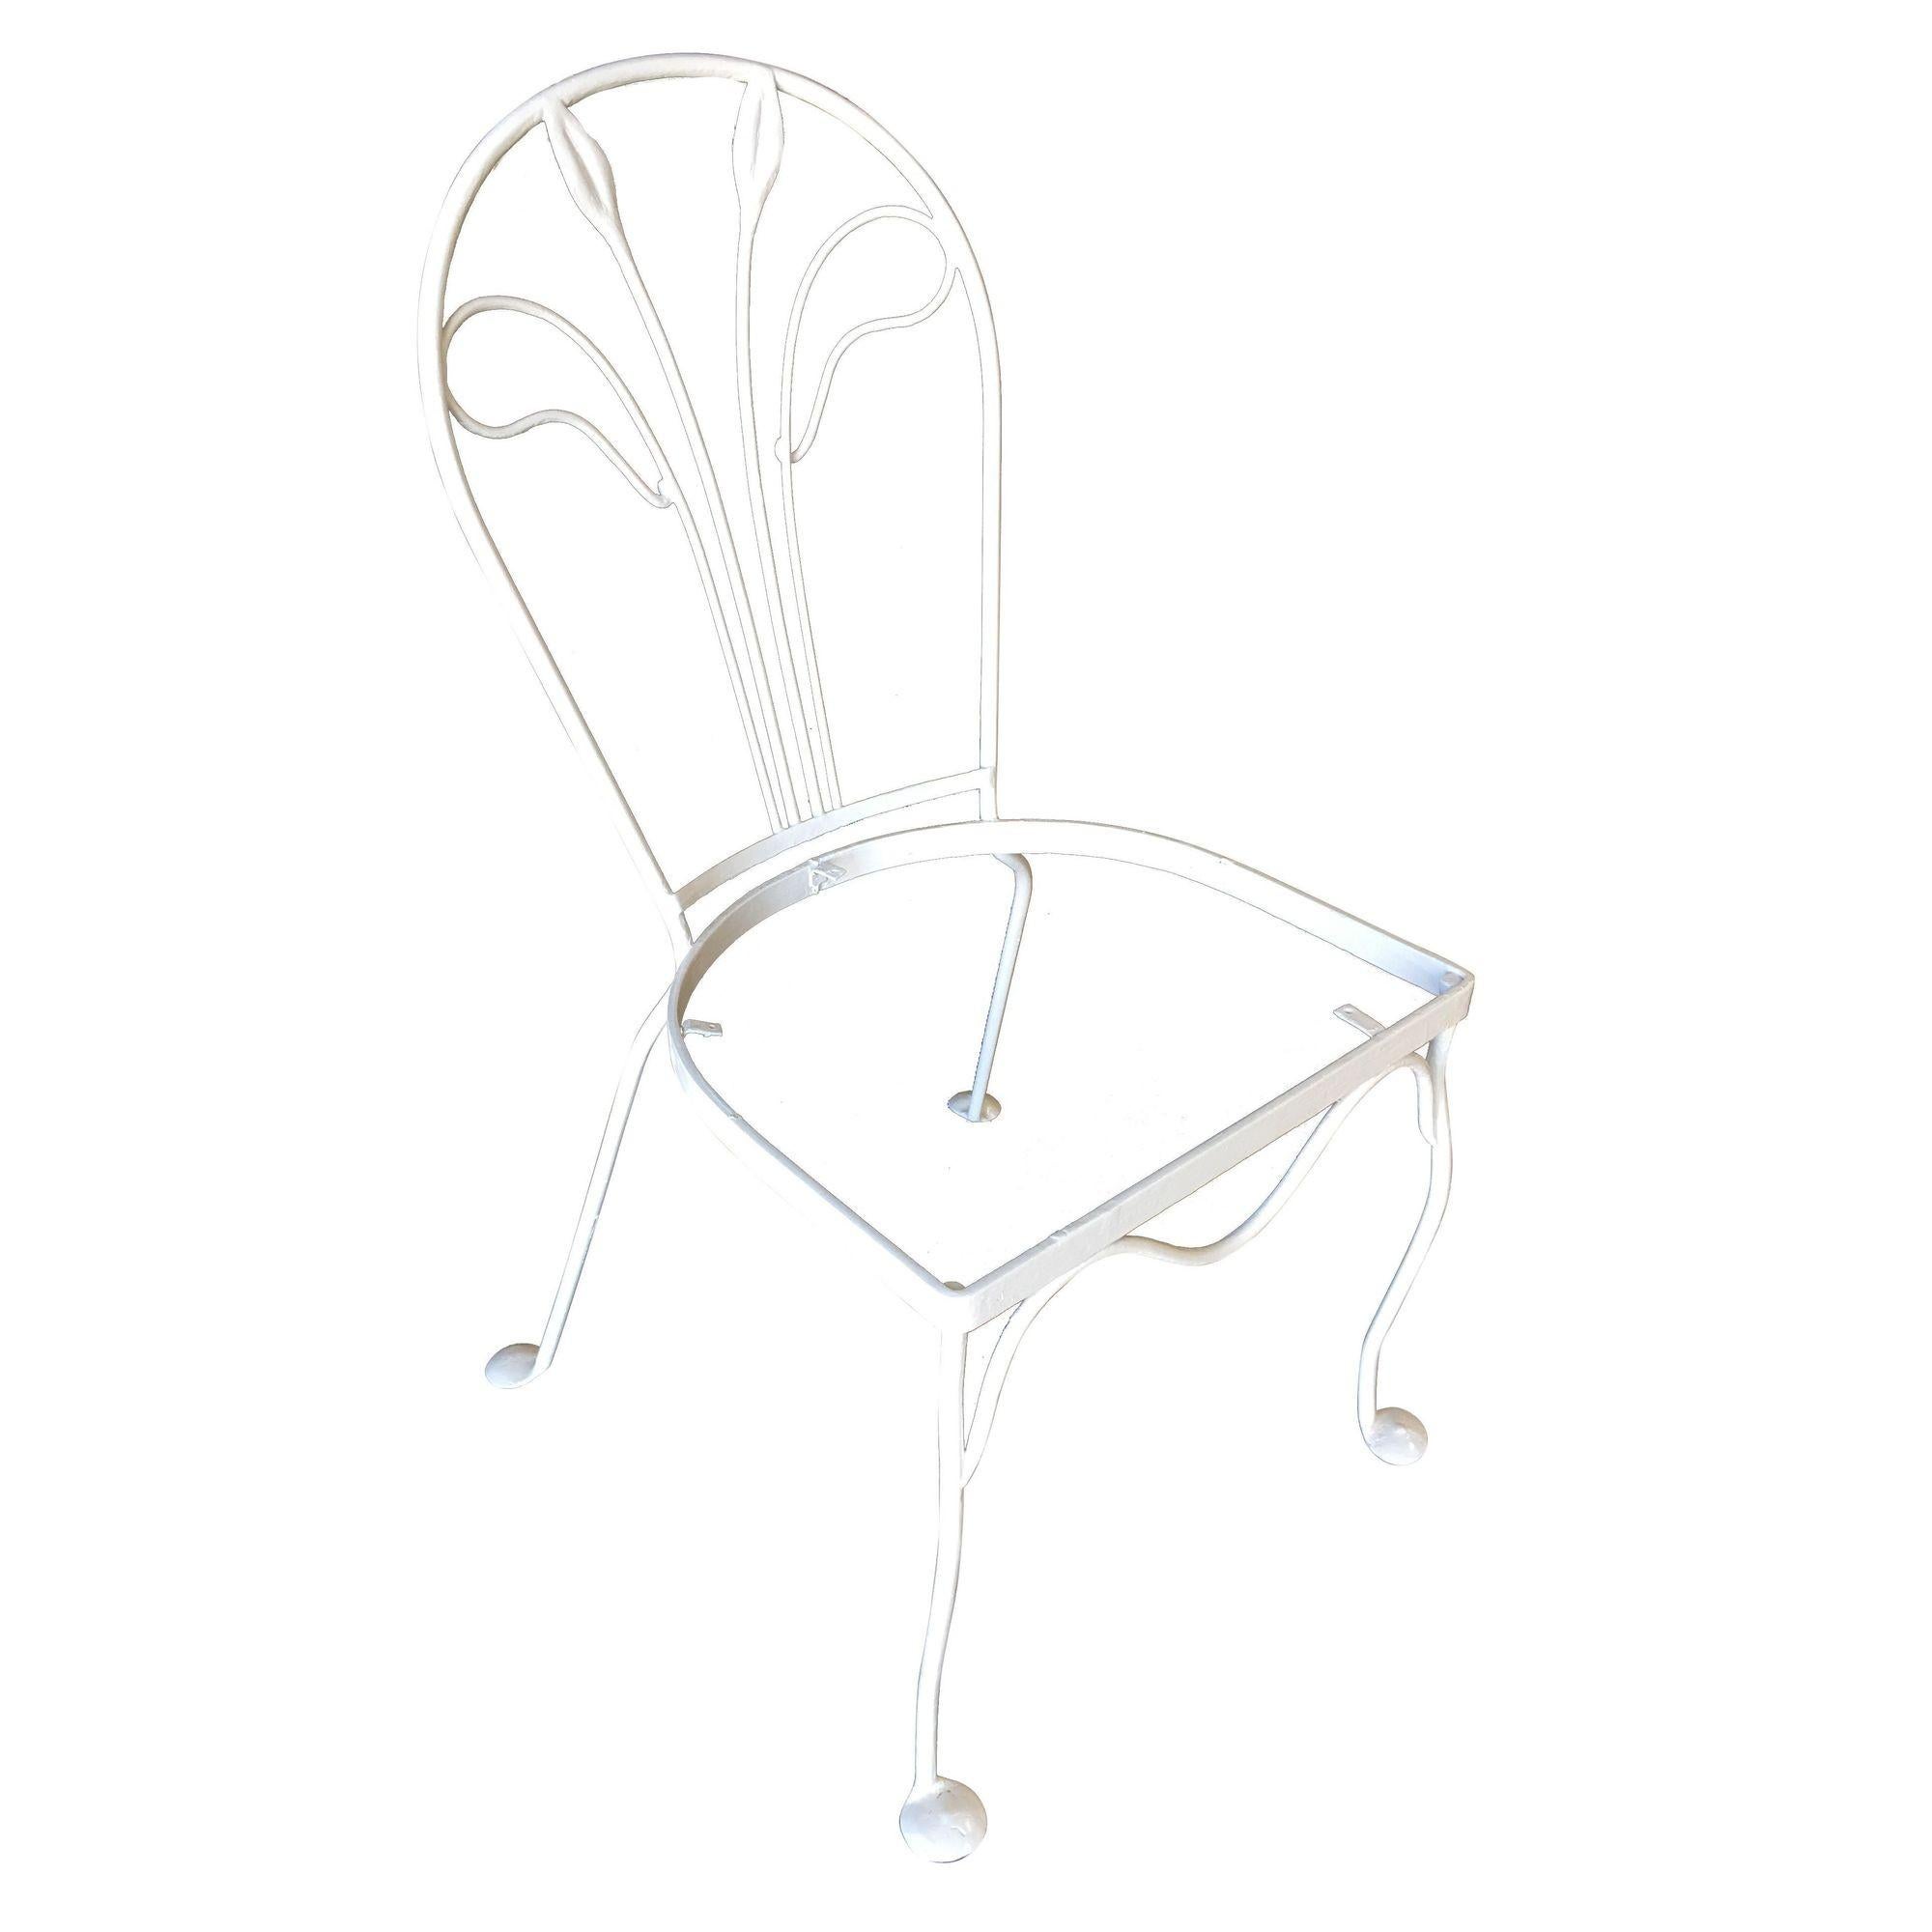 A set of four Woodard rod iron outdoor/patio chair with a distinct tropical leaf backrest. This chair is constructed with solid core iron rods and is finished in your choice of a pure white or black finish with padded seats. All outdoor furniture